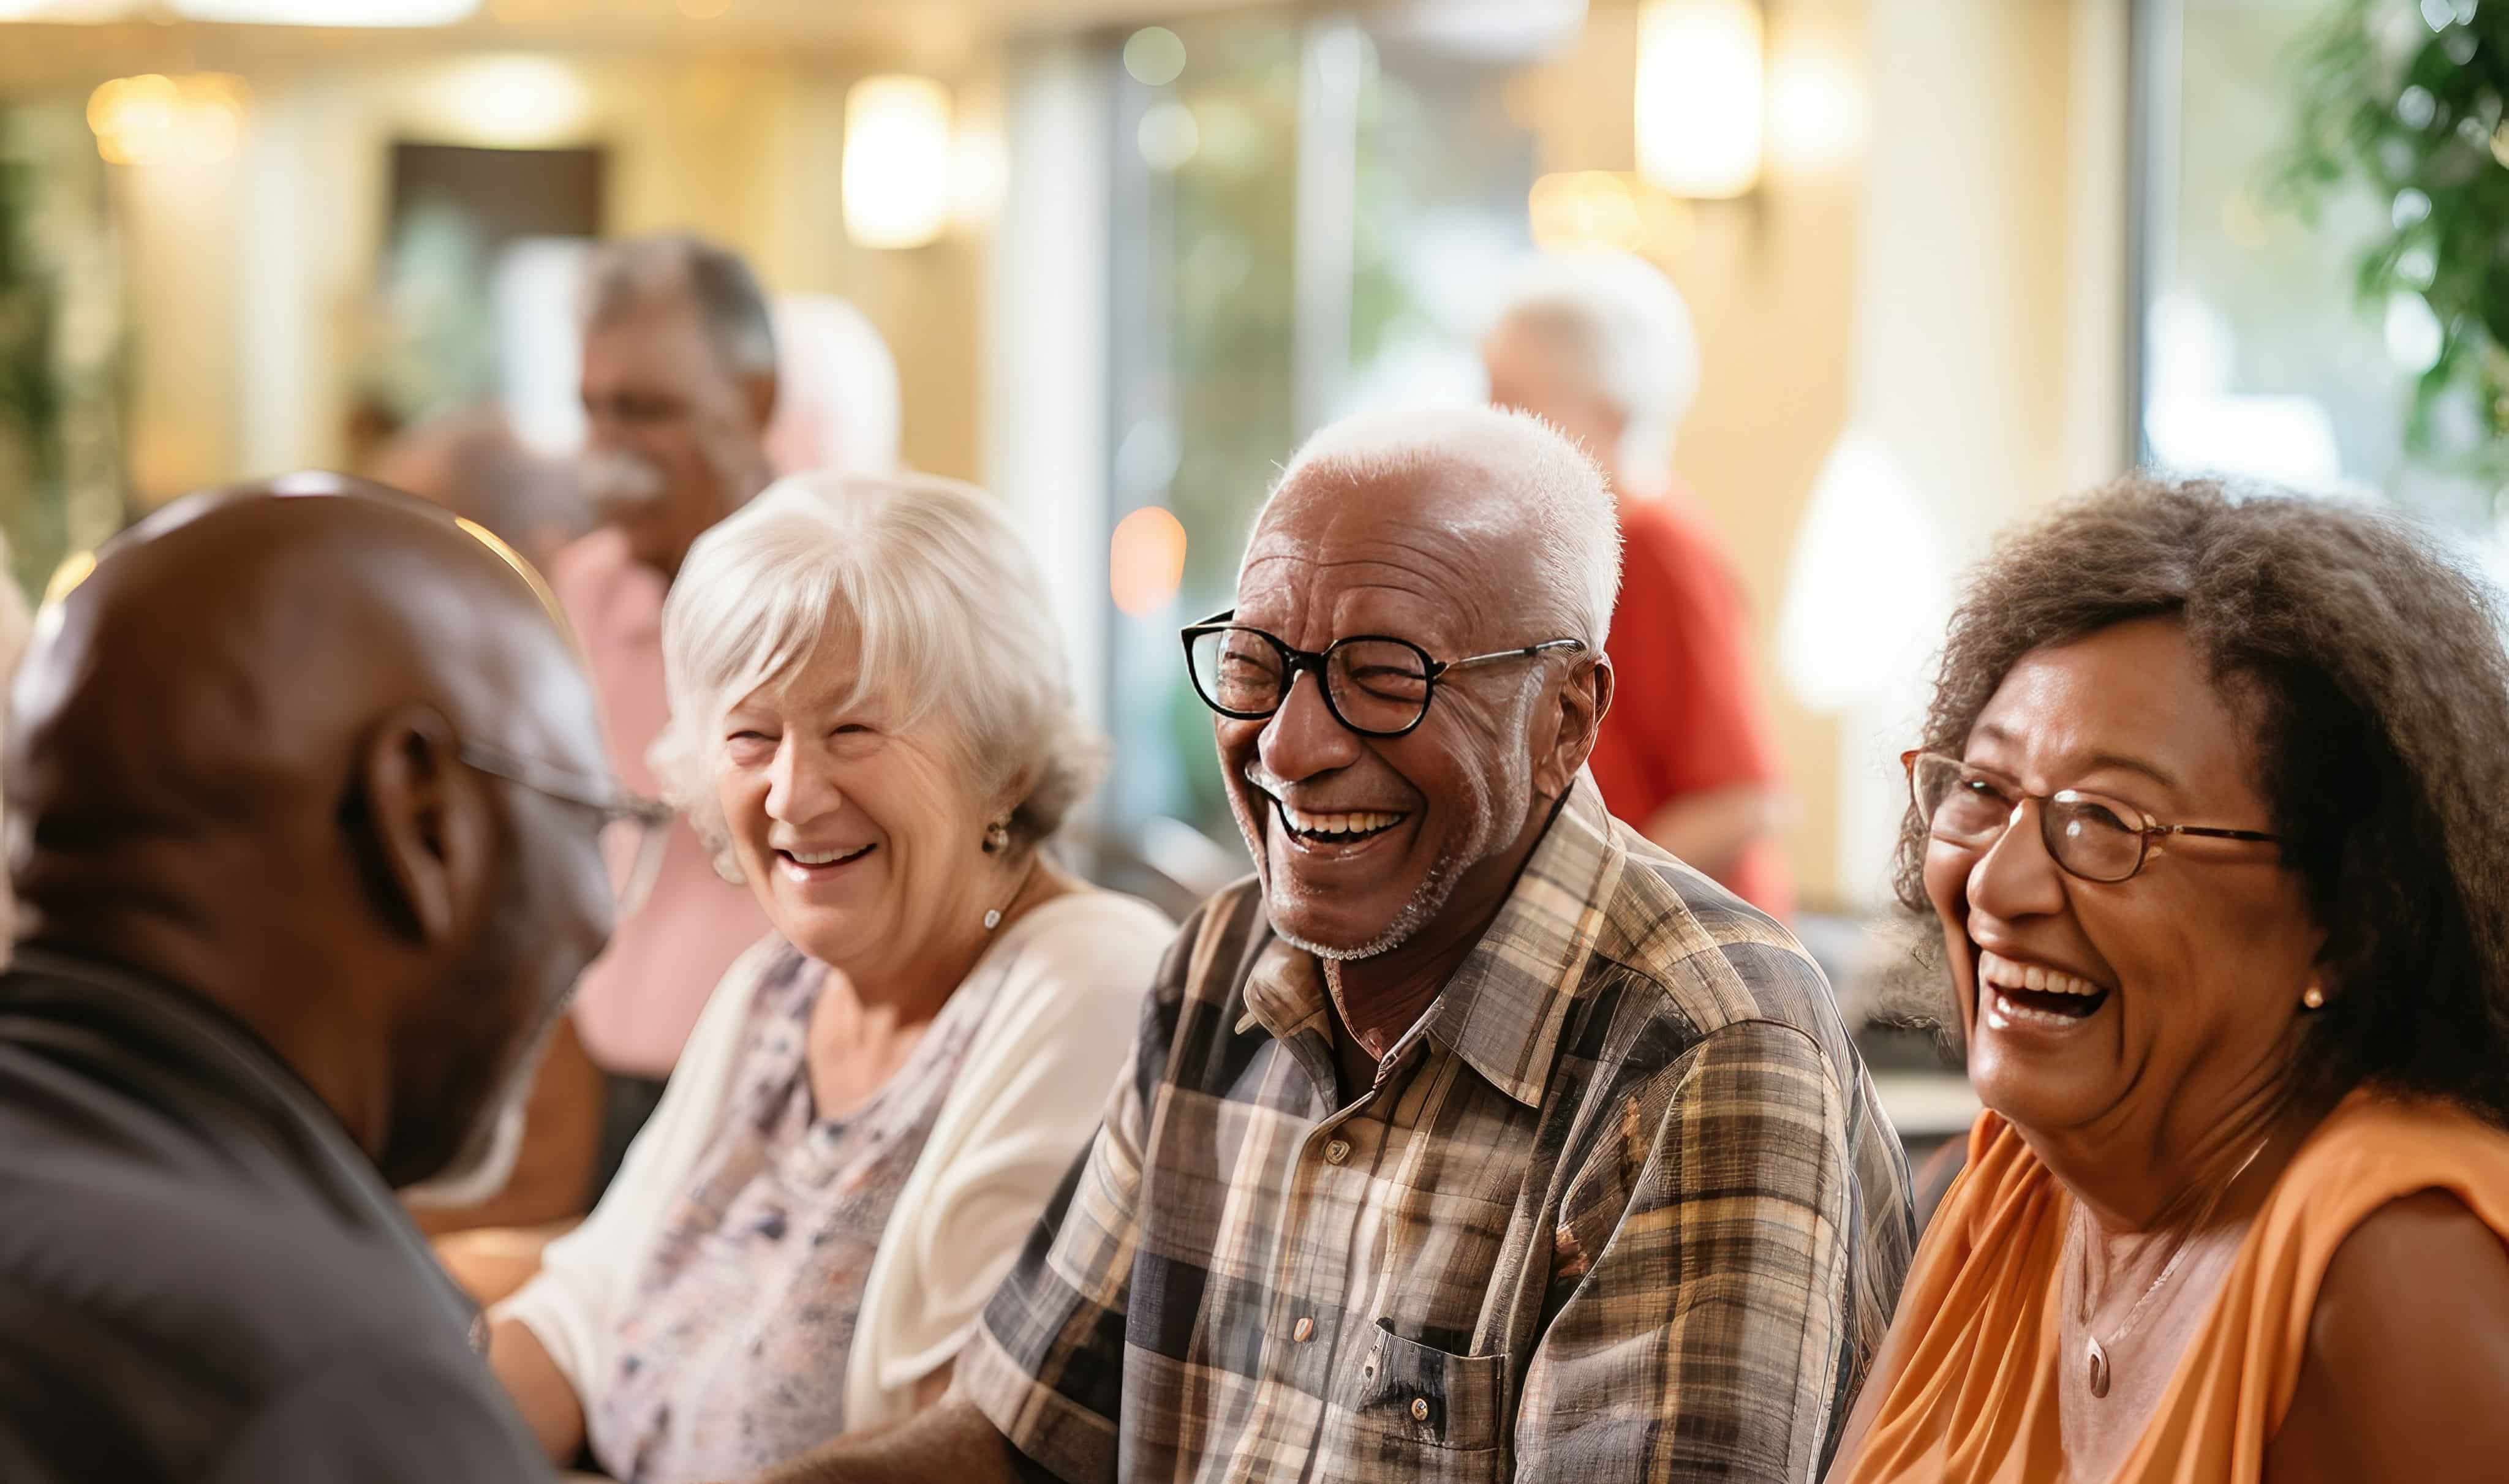 Group of elderly people in assisted living participating in activity